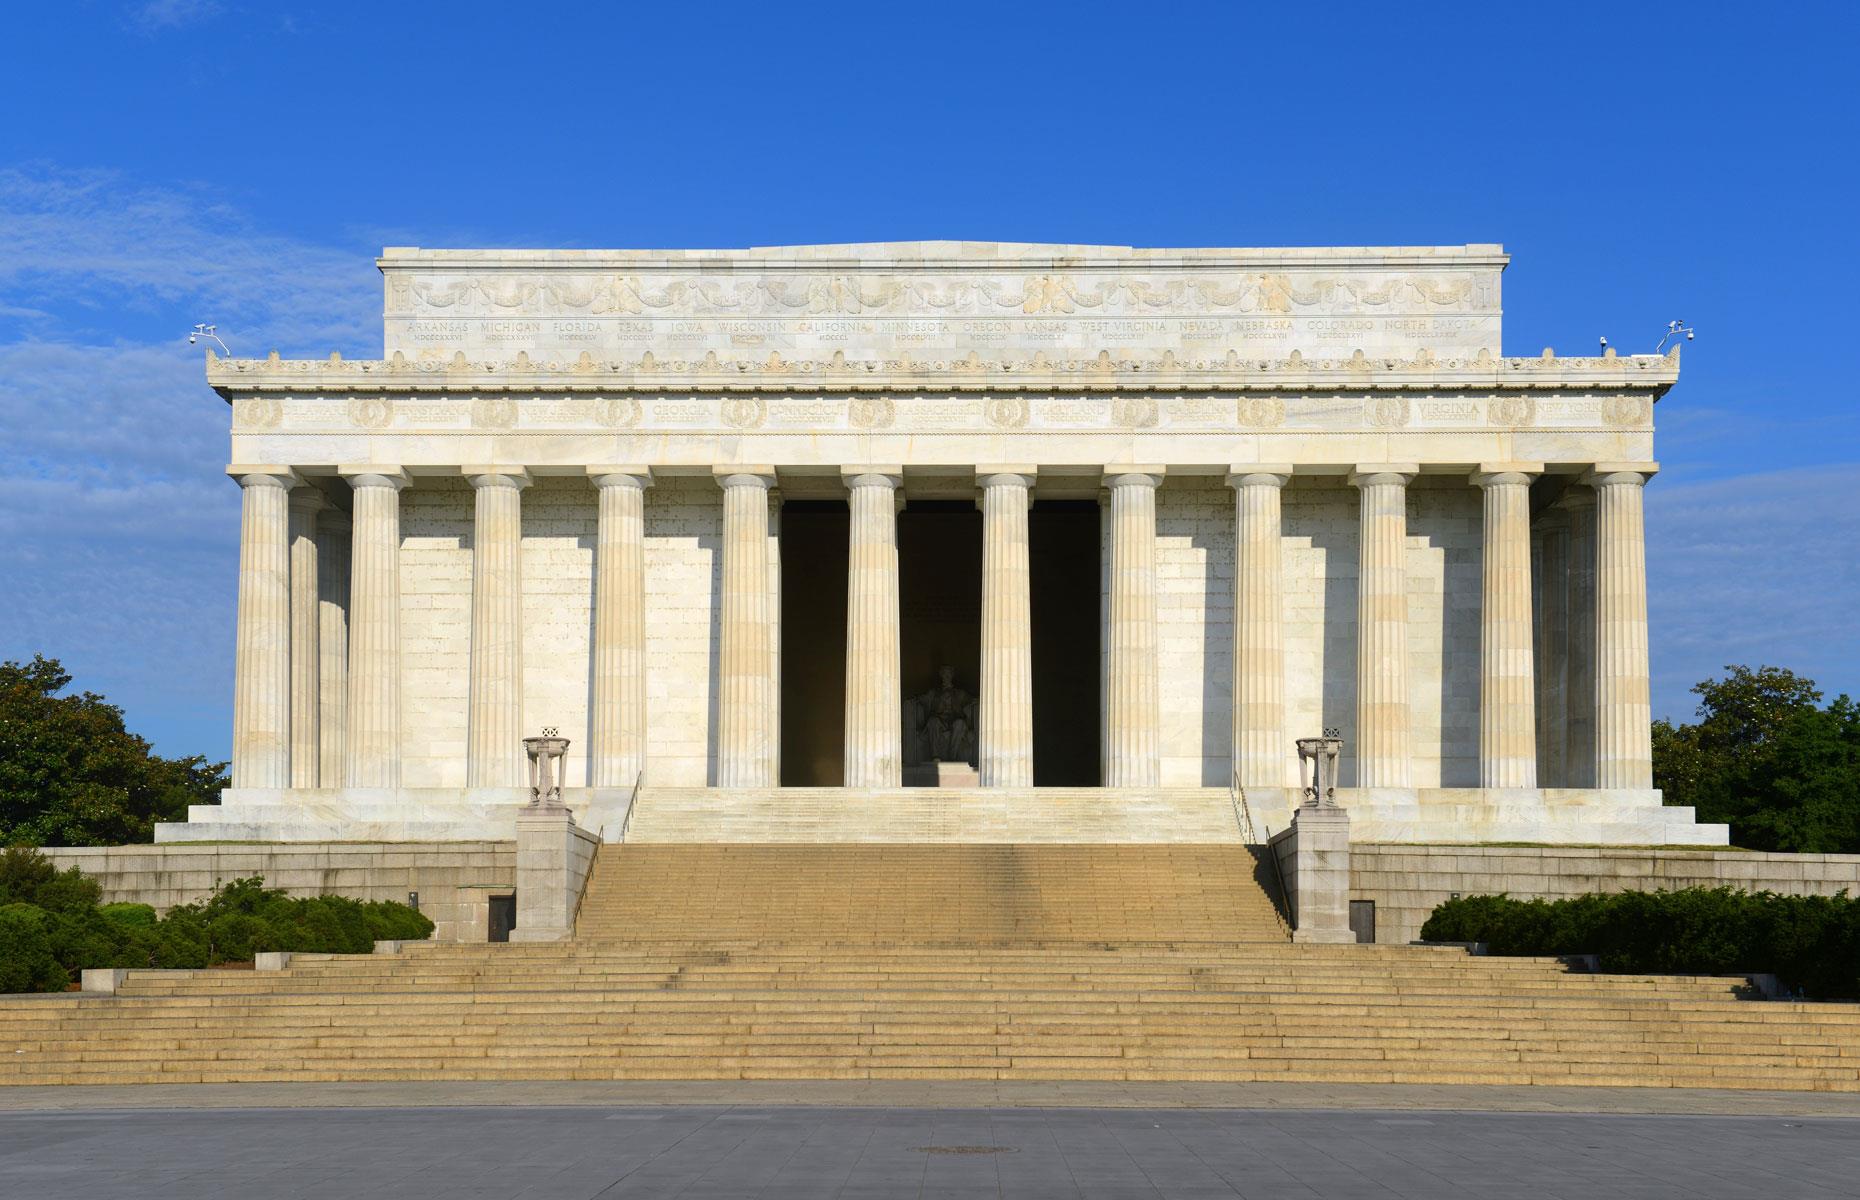 While Washington missed out, America's monument to Abraham Lincoln does take the form of a Greek Doric temple, complete with columns and classical sculptures. Completed in 1922, the Washington DC memorial was designed by architect Henry Bacon.